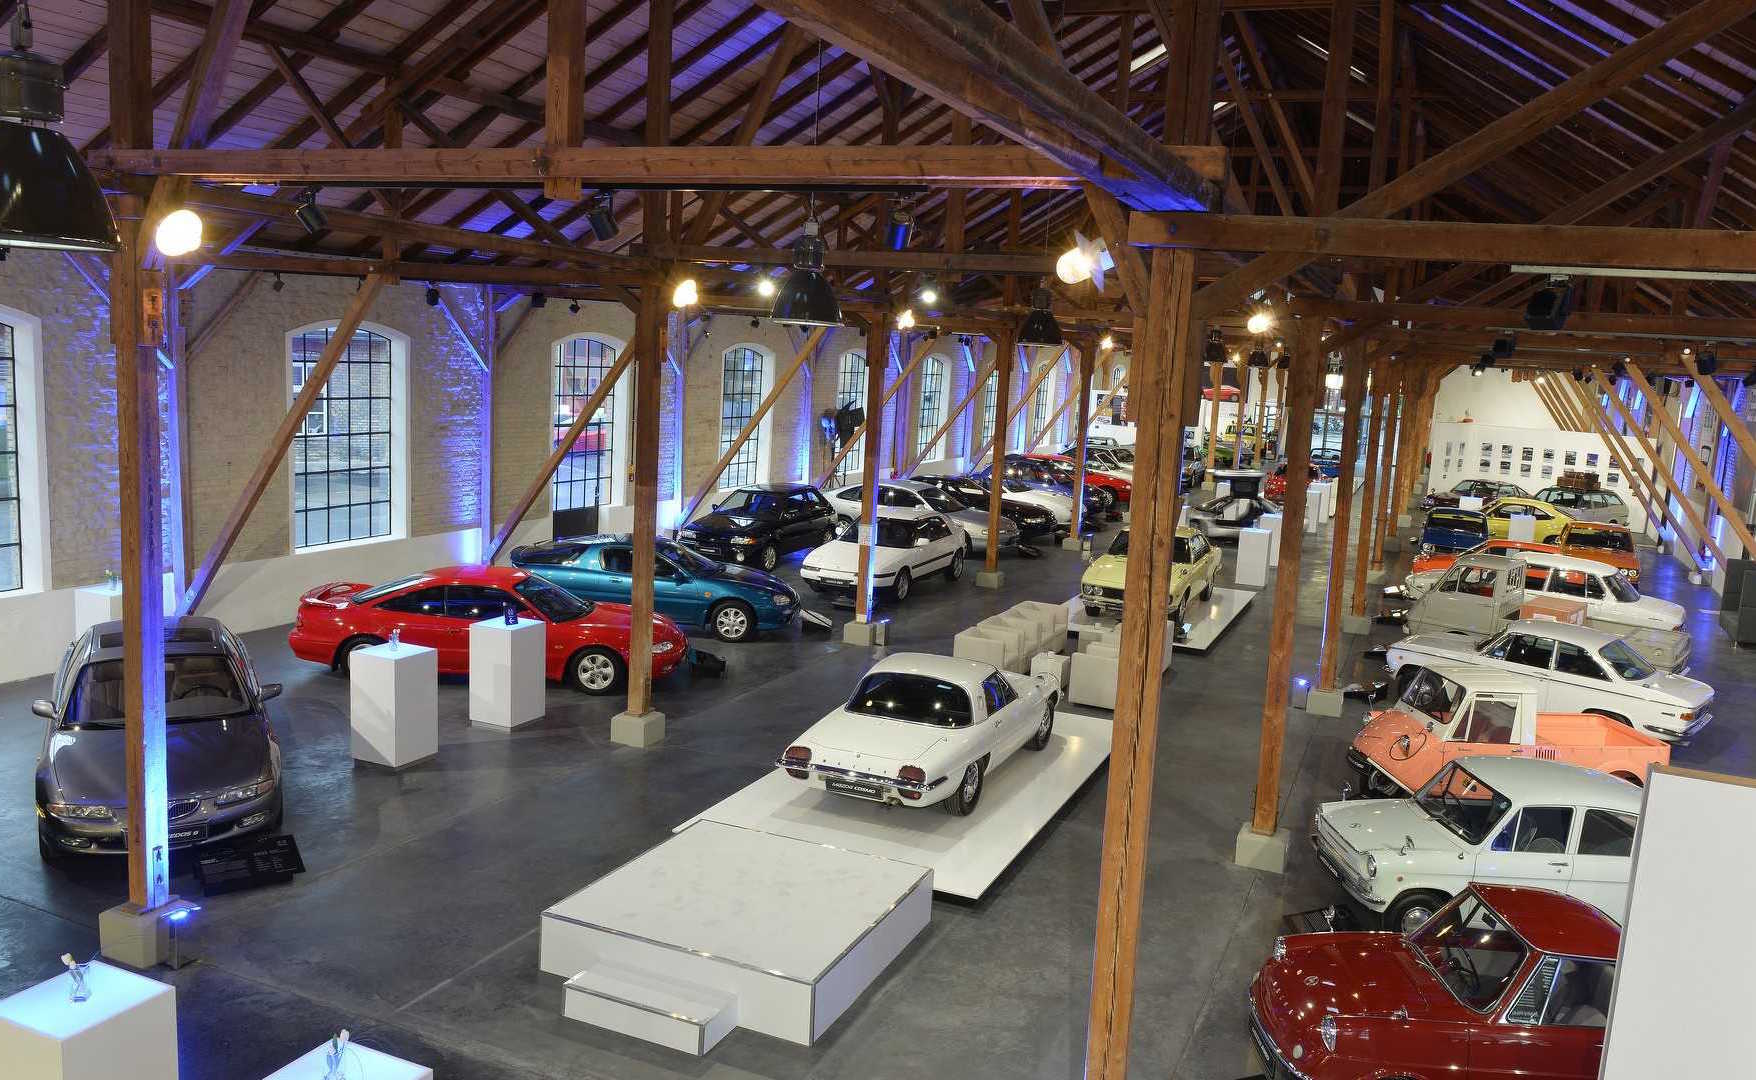 Mazda classic car museum opens in Germany, first outside Japan